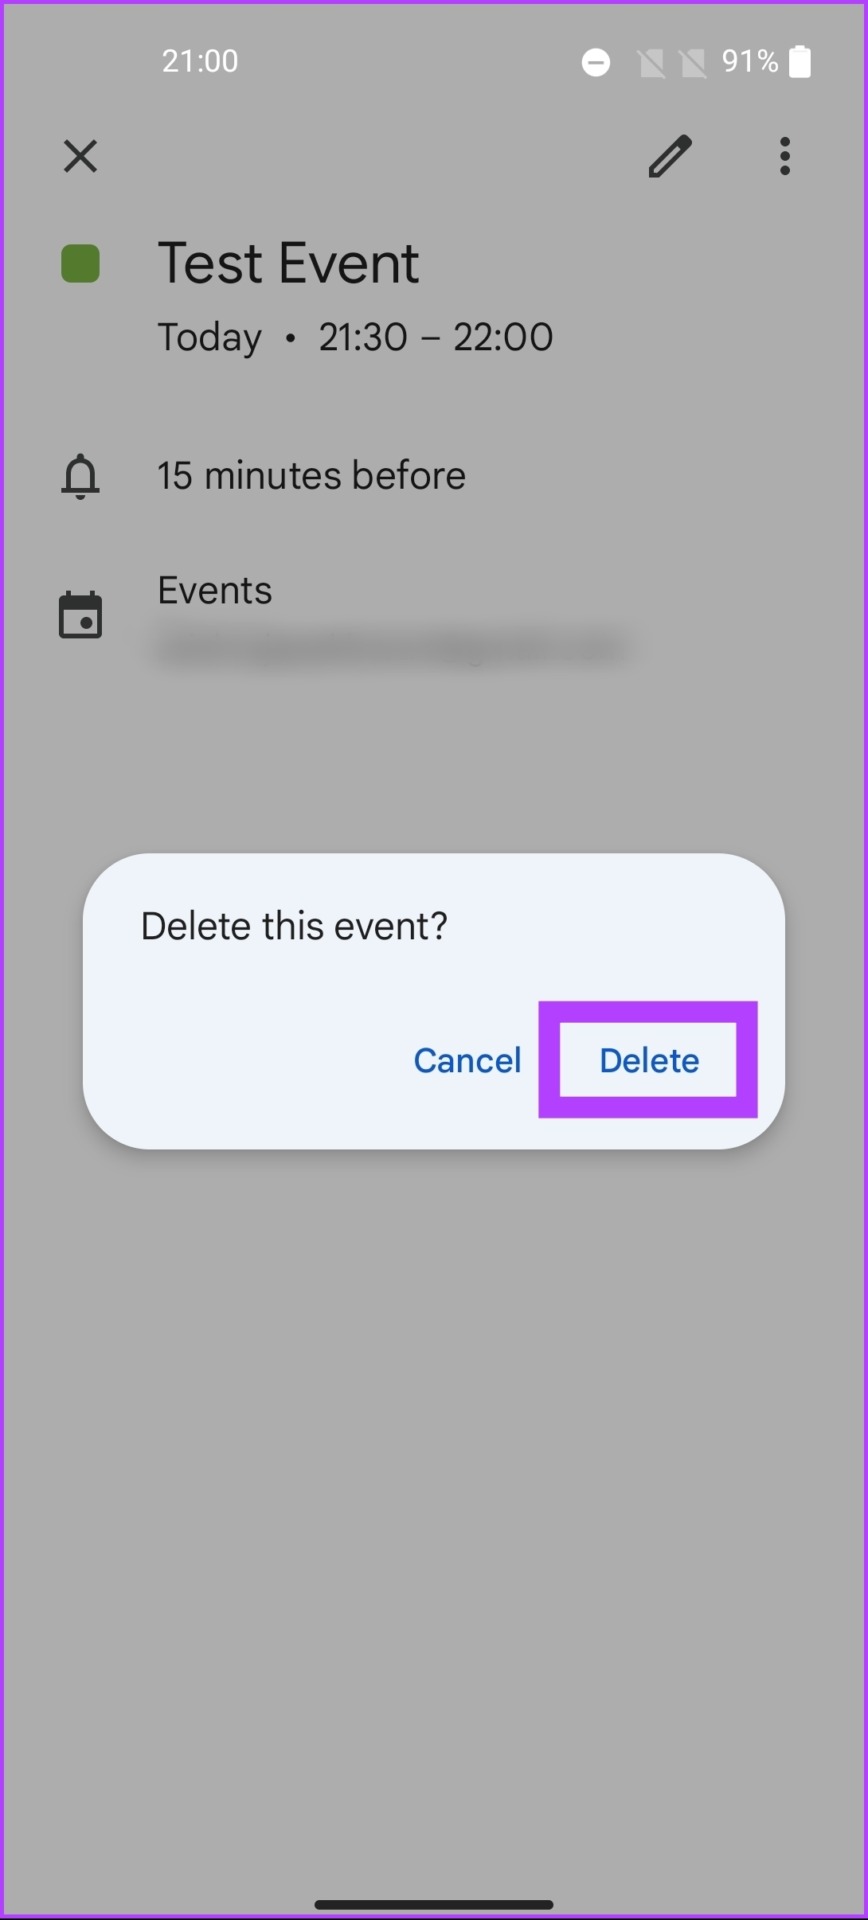 In the 'Delete this event' pop-up, select Delete.